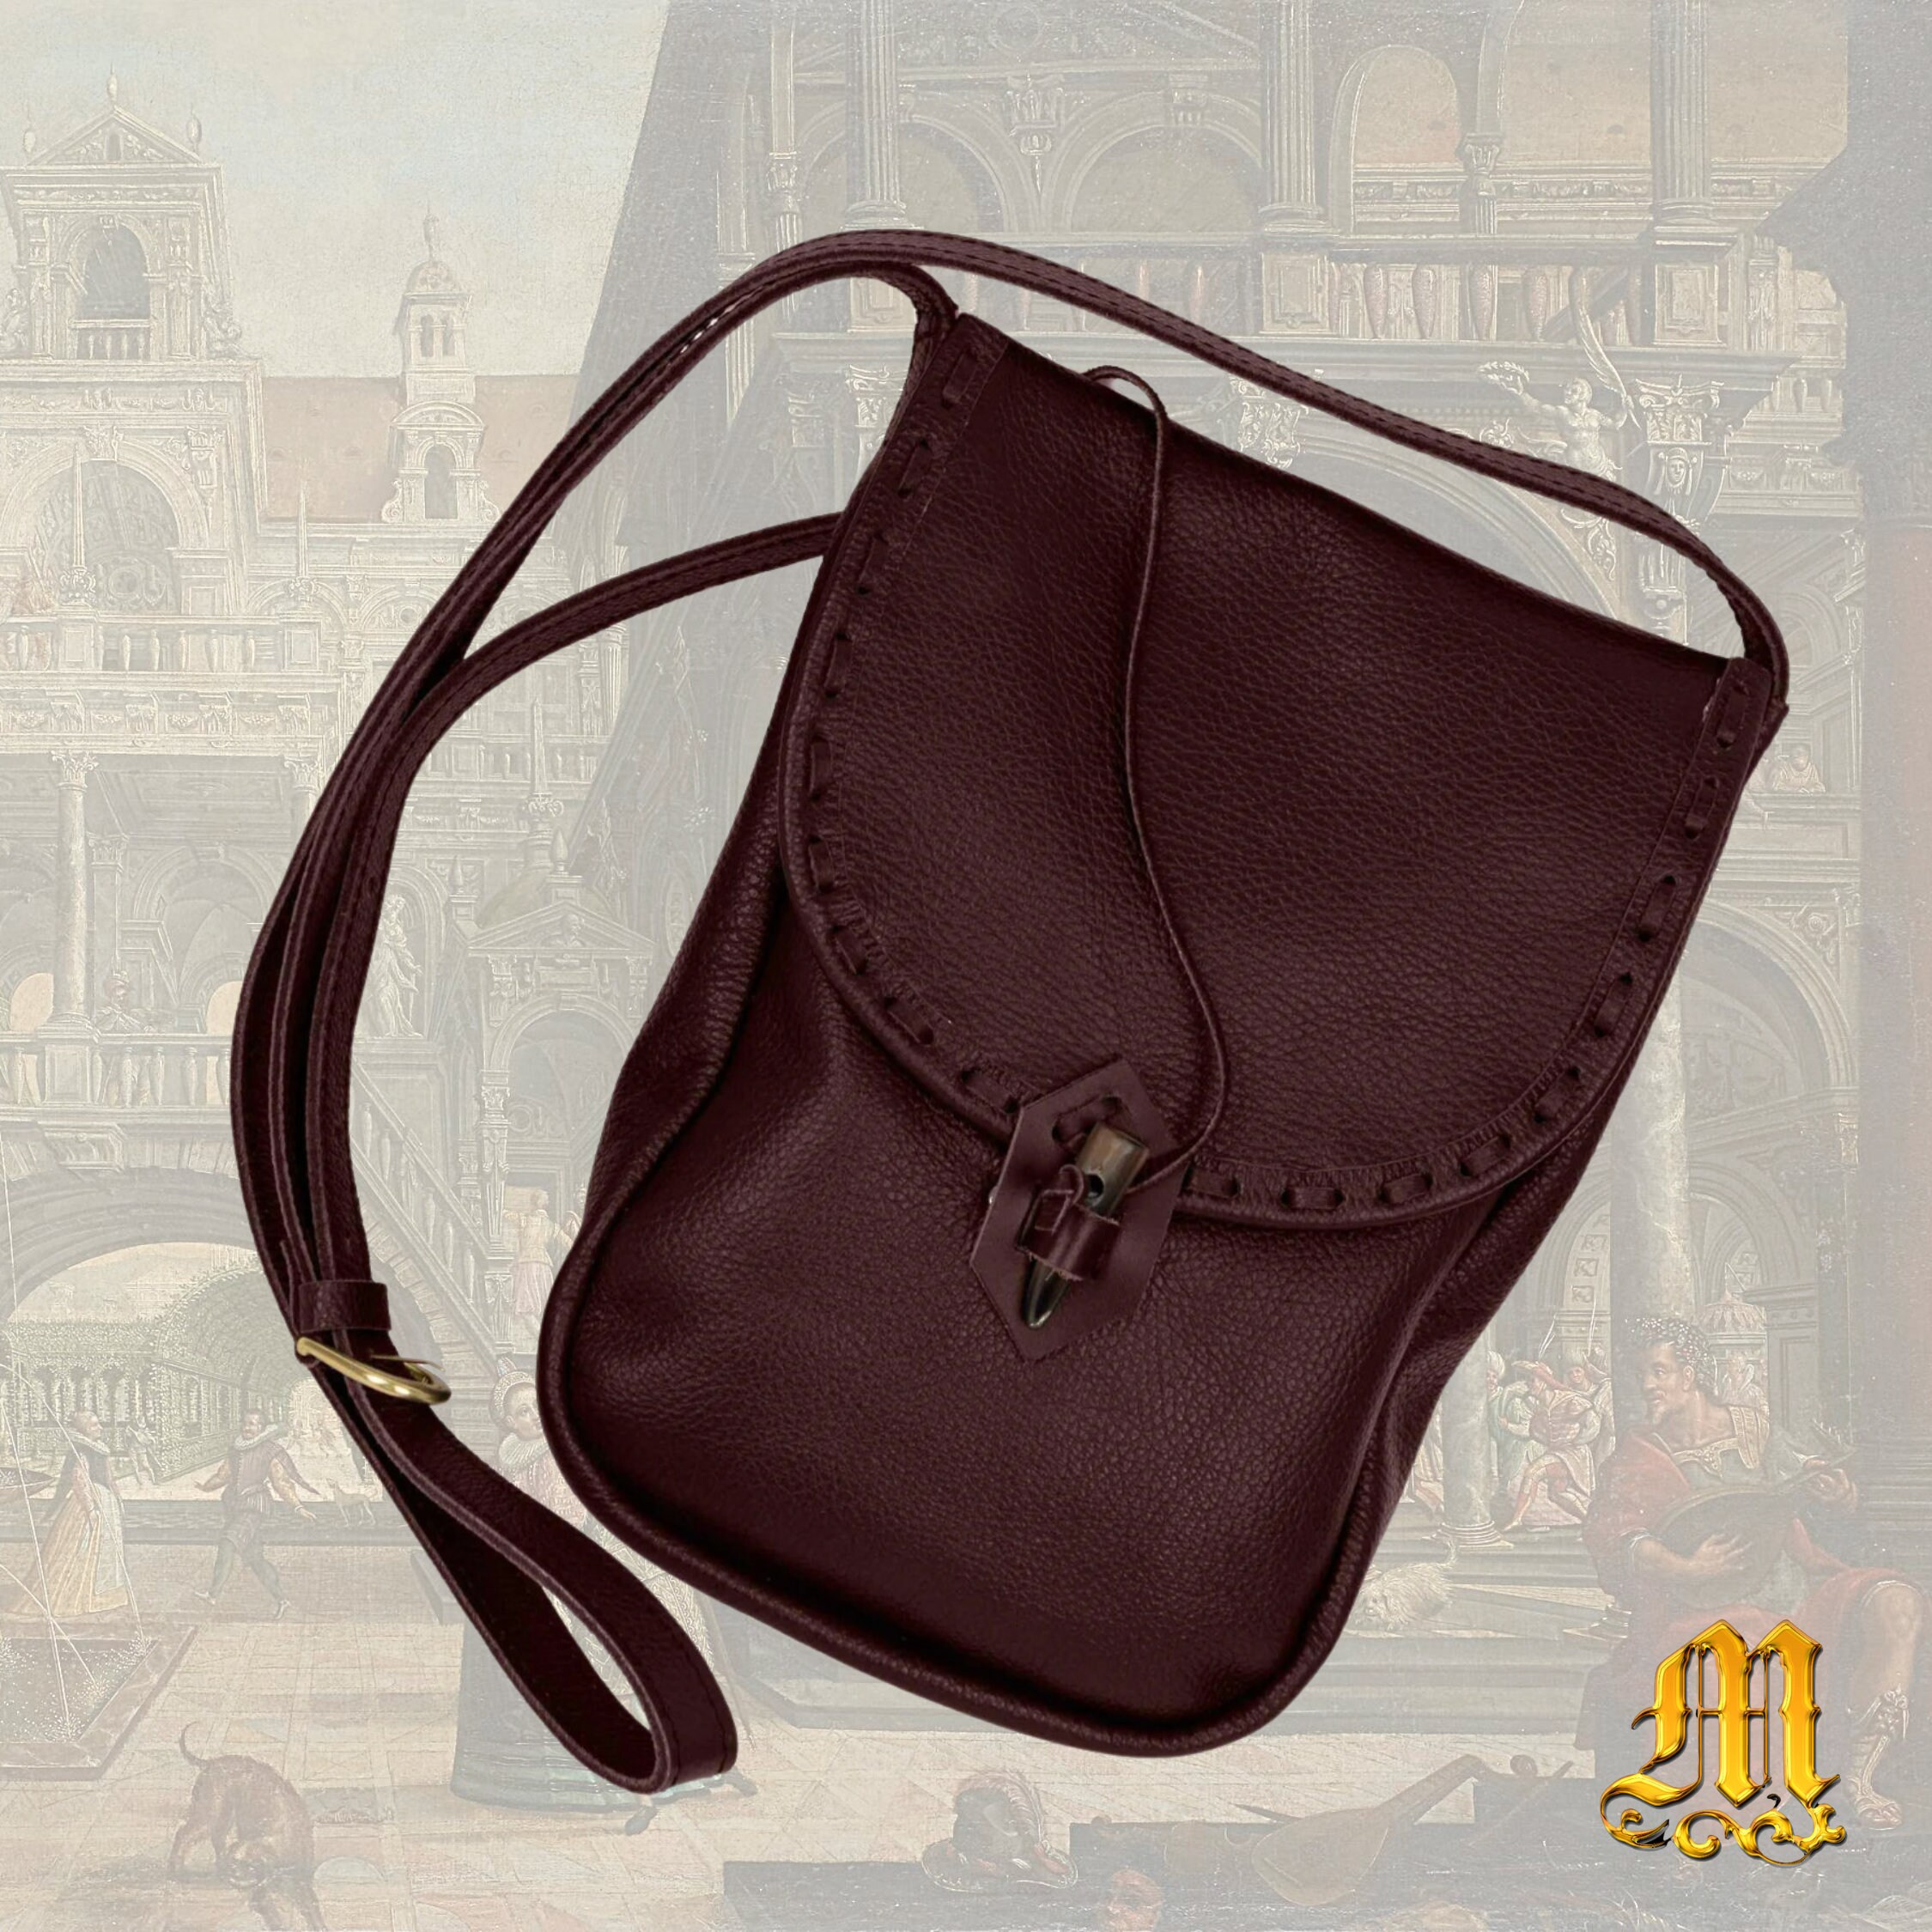 Medieval Leather Drawstring Pouch - Dice Bag with Lion Head Design